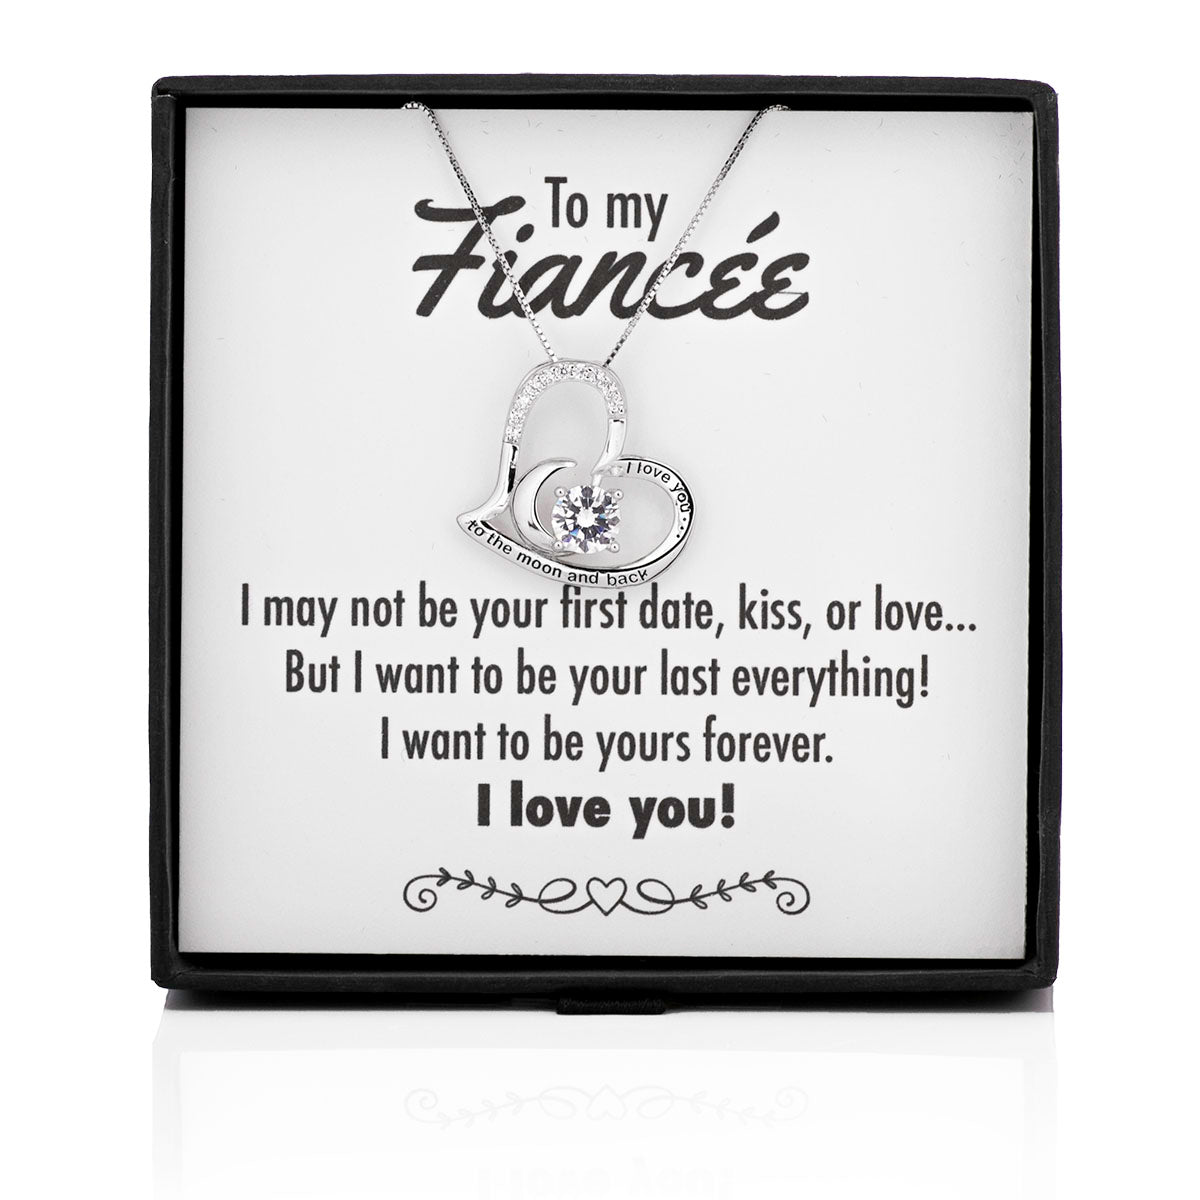 Your Last Everything Moon & Back Heart Silver Necklace - Fiancée